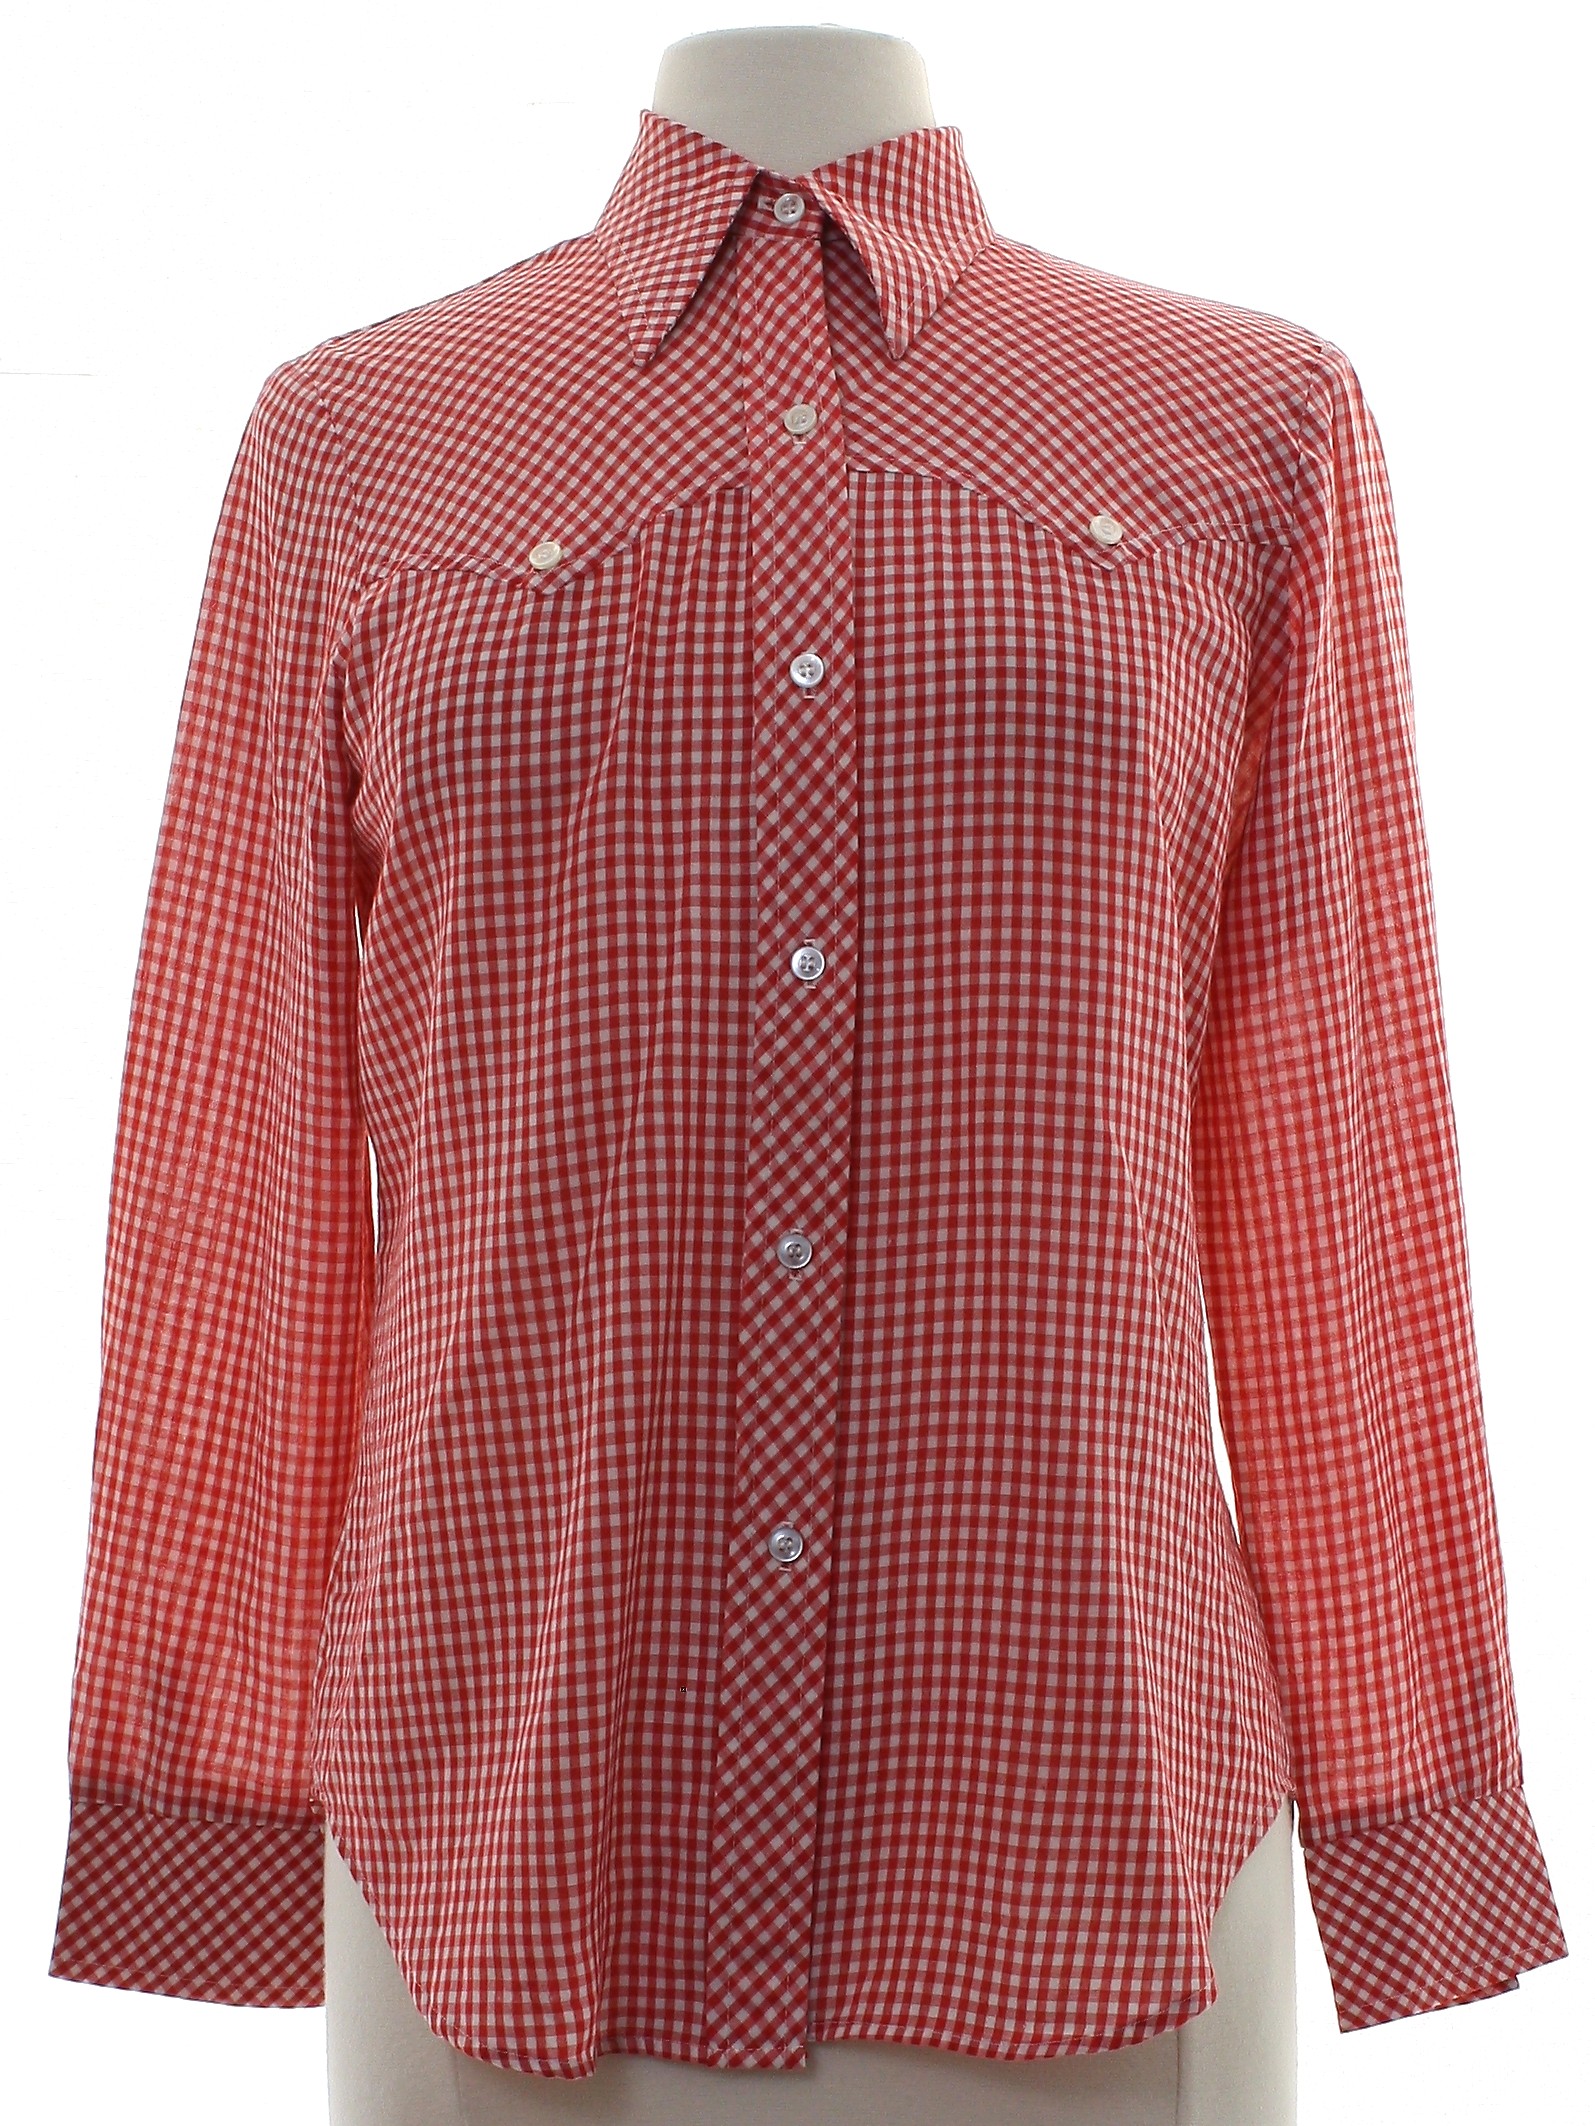 80's Vintage Western Shirt: Early 80s -Koret City Blues- Womens red and ...